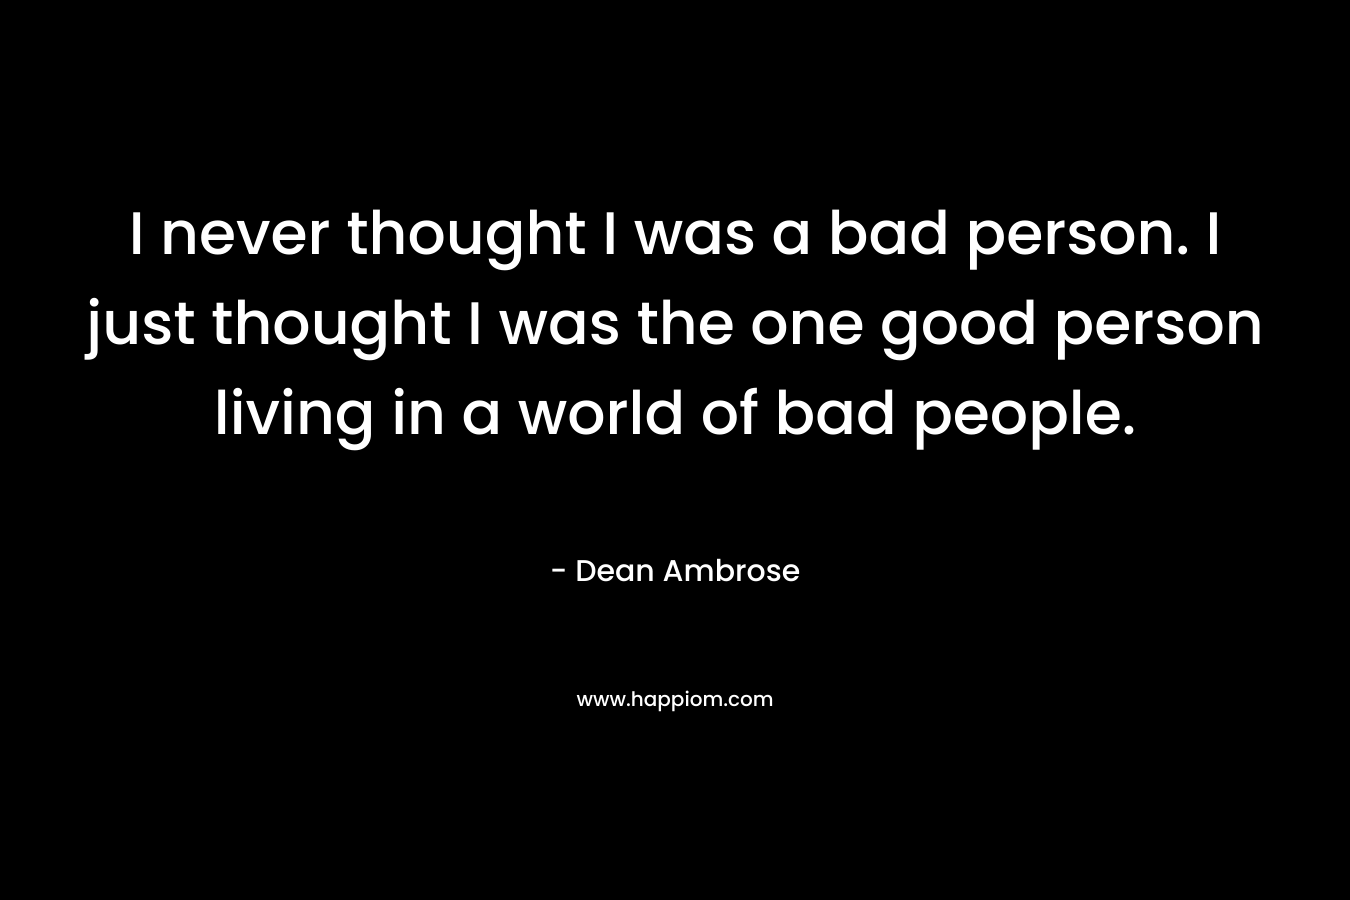 I never thought I was a bad person. I just thought I was the one good person living in a world of bad people. – Dean Ambrose